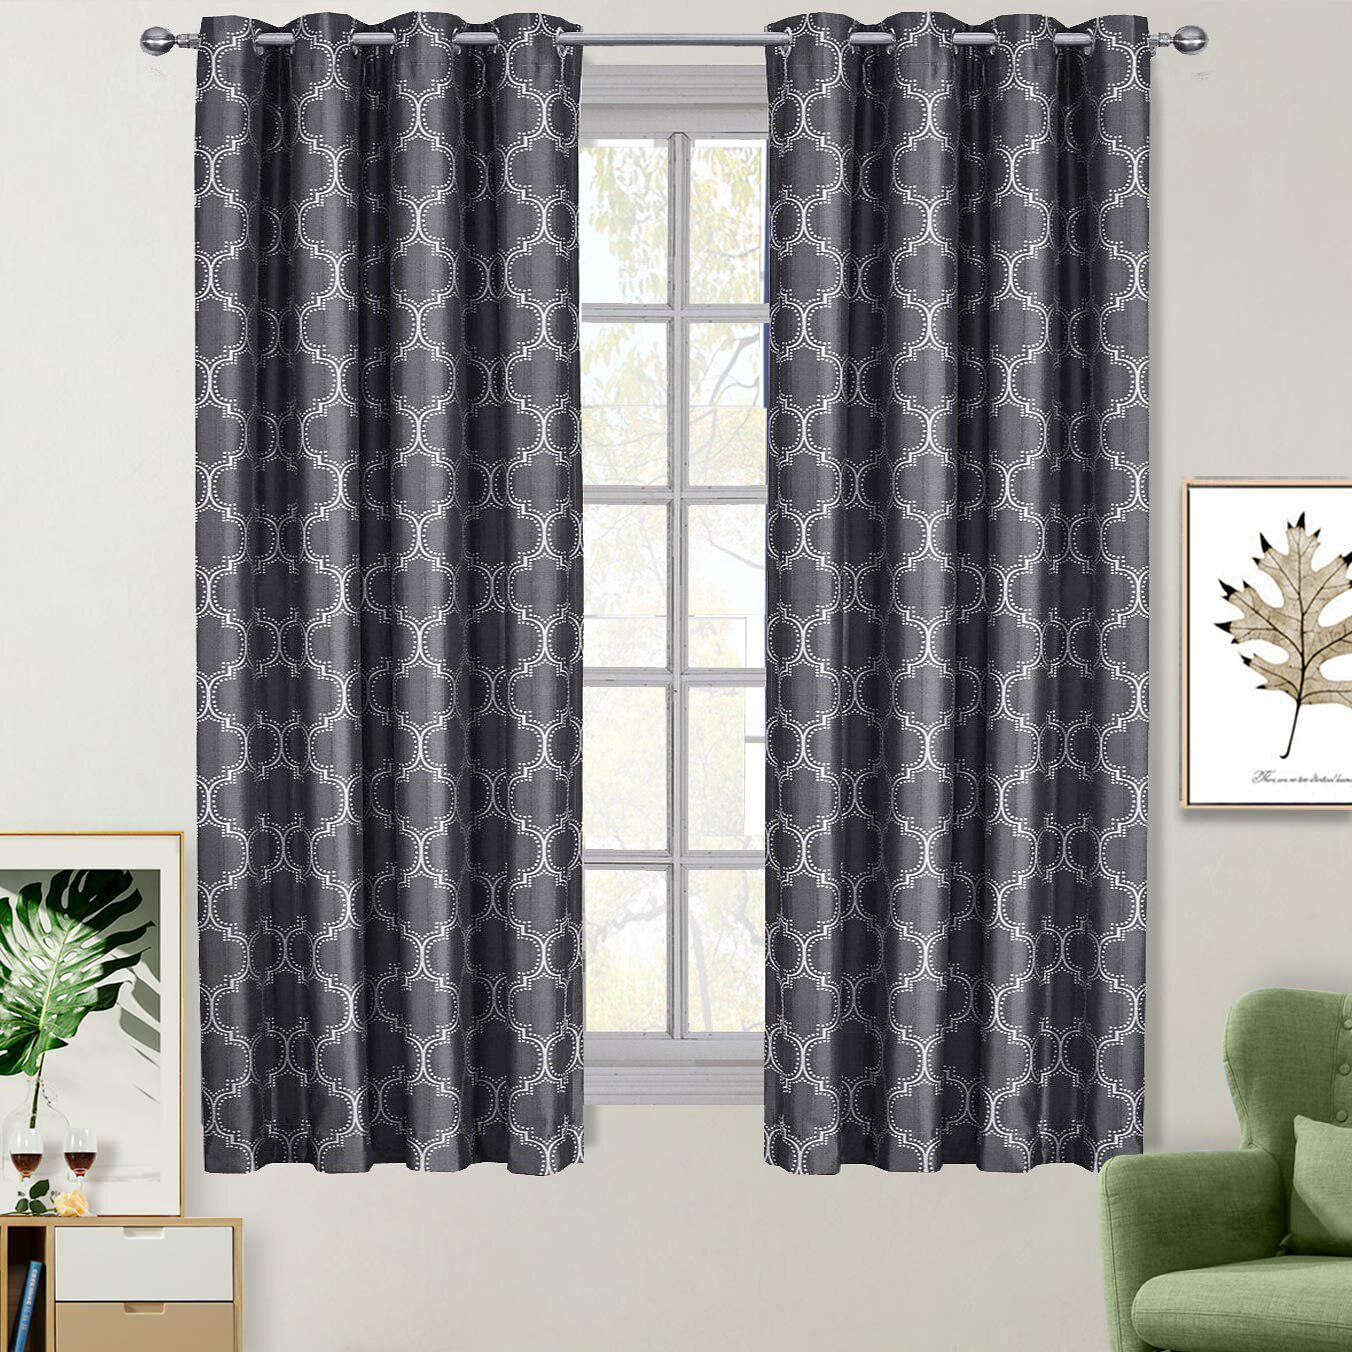 100% Blackout Curtain Panels Alana - Woven Jacquard Triple Pass Thermal Insulated (Set of 2 Panels)